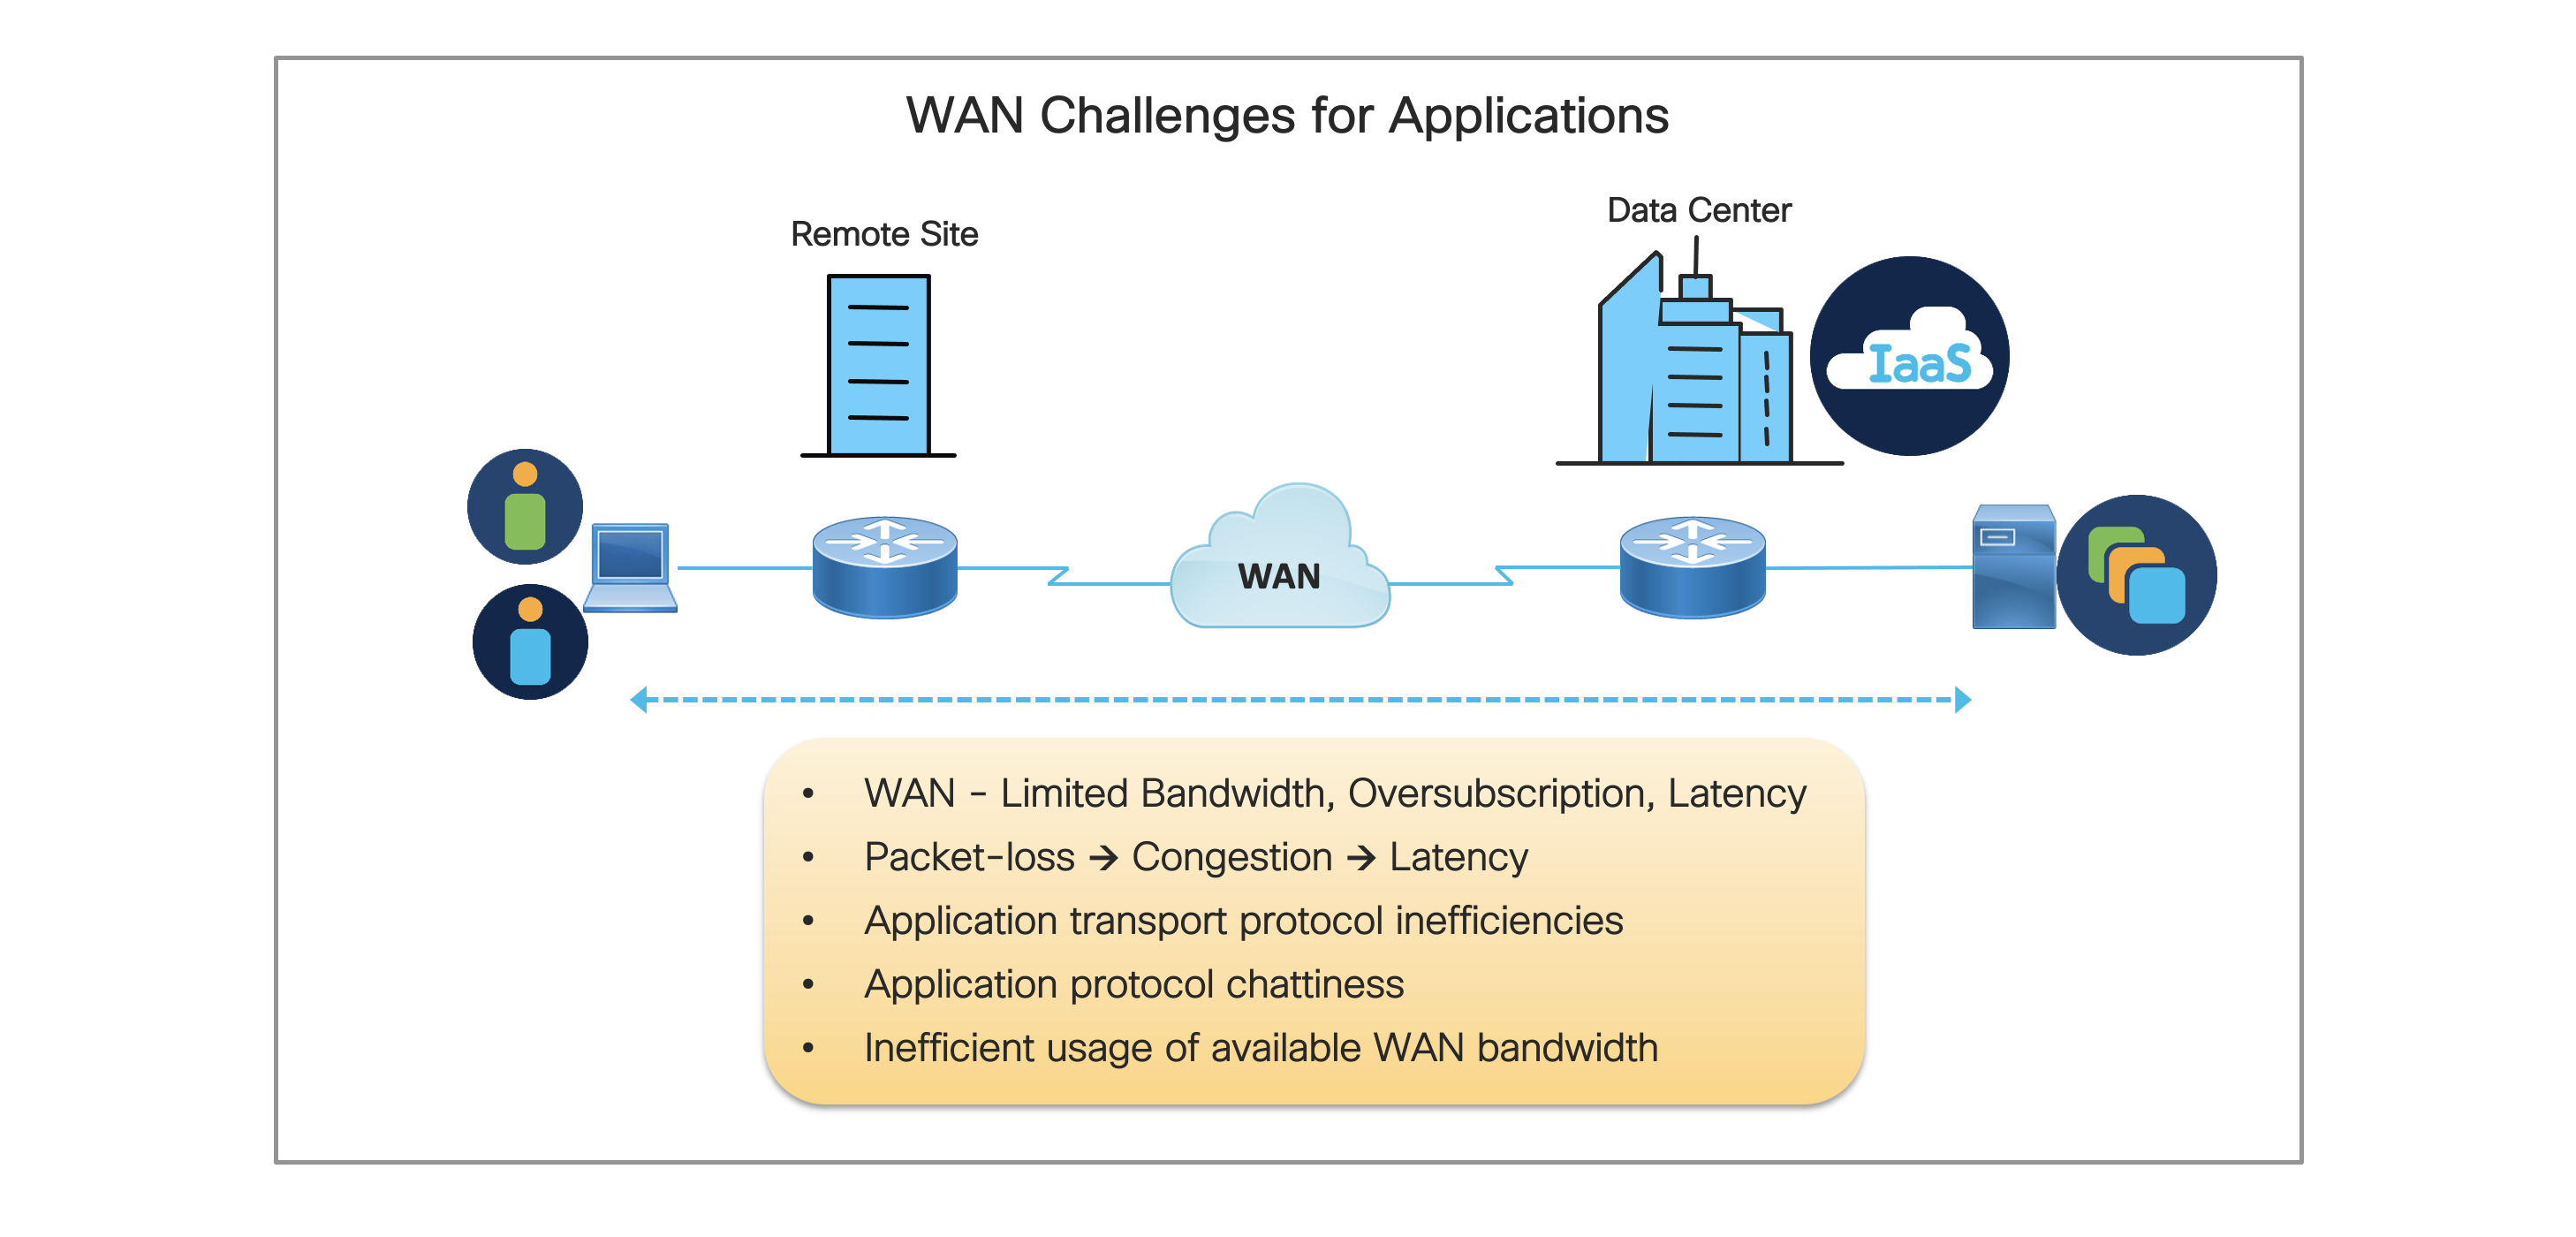 WAN Challenges for Applications